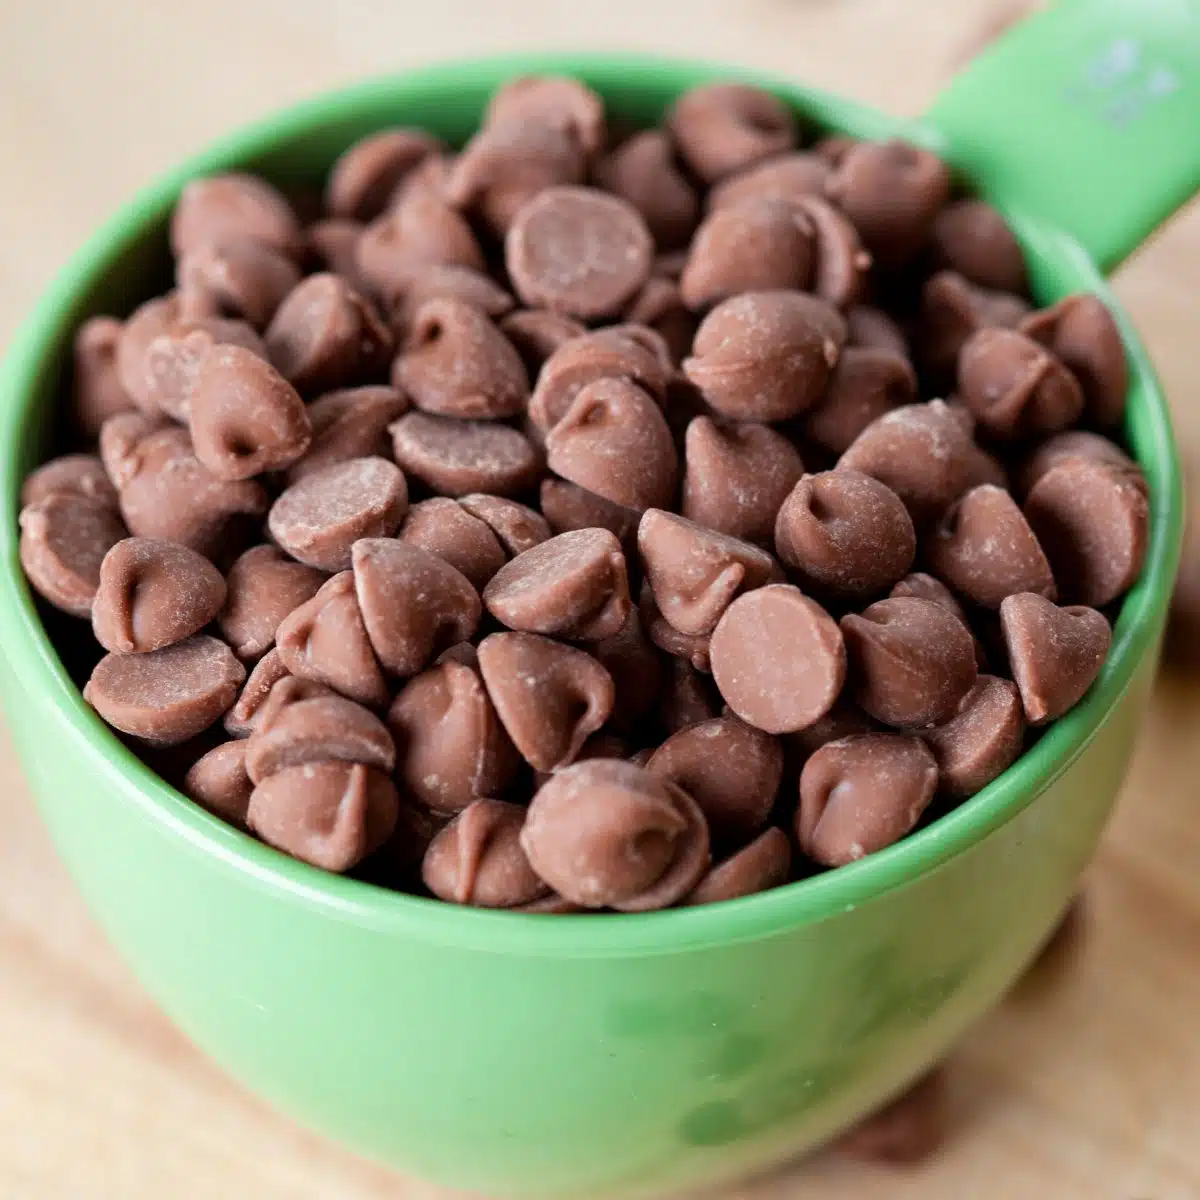 Square image of a cup of chocolate chips.